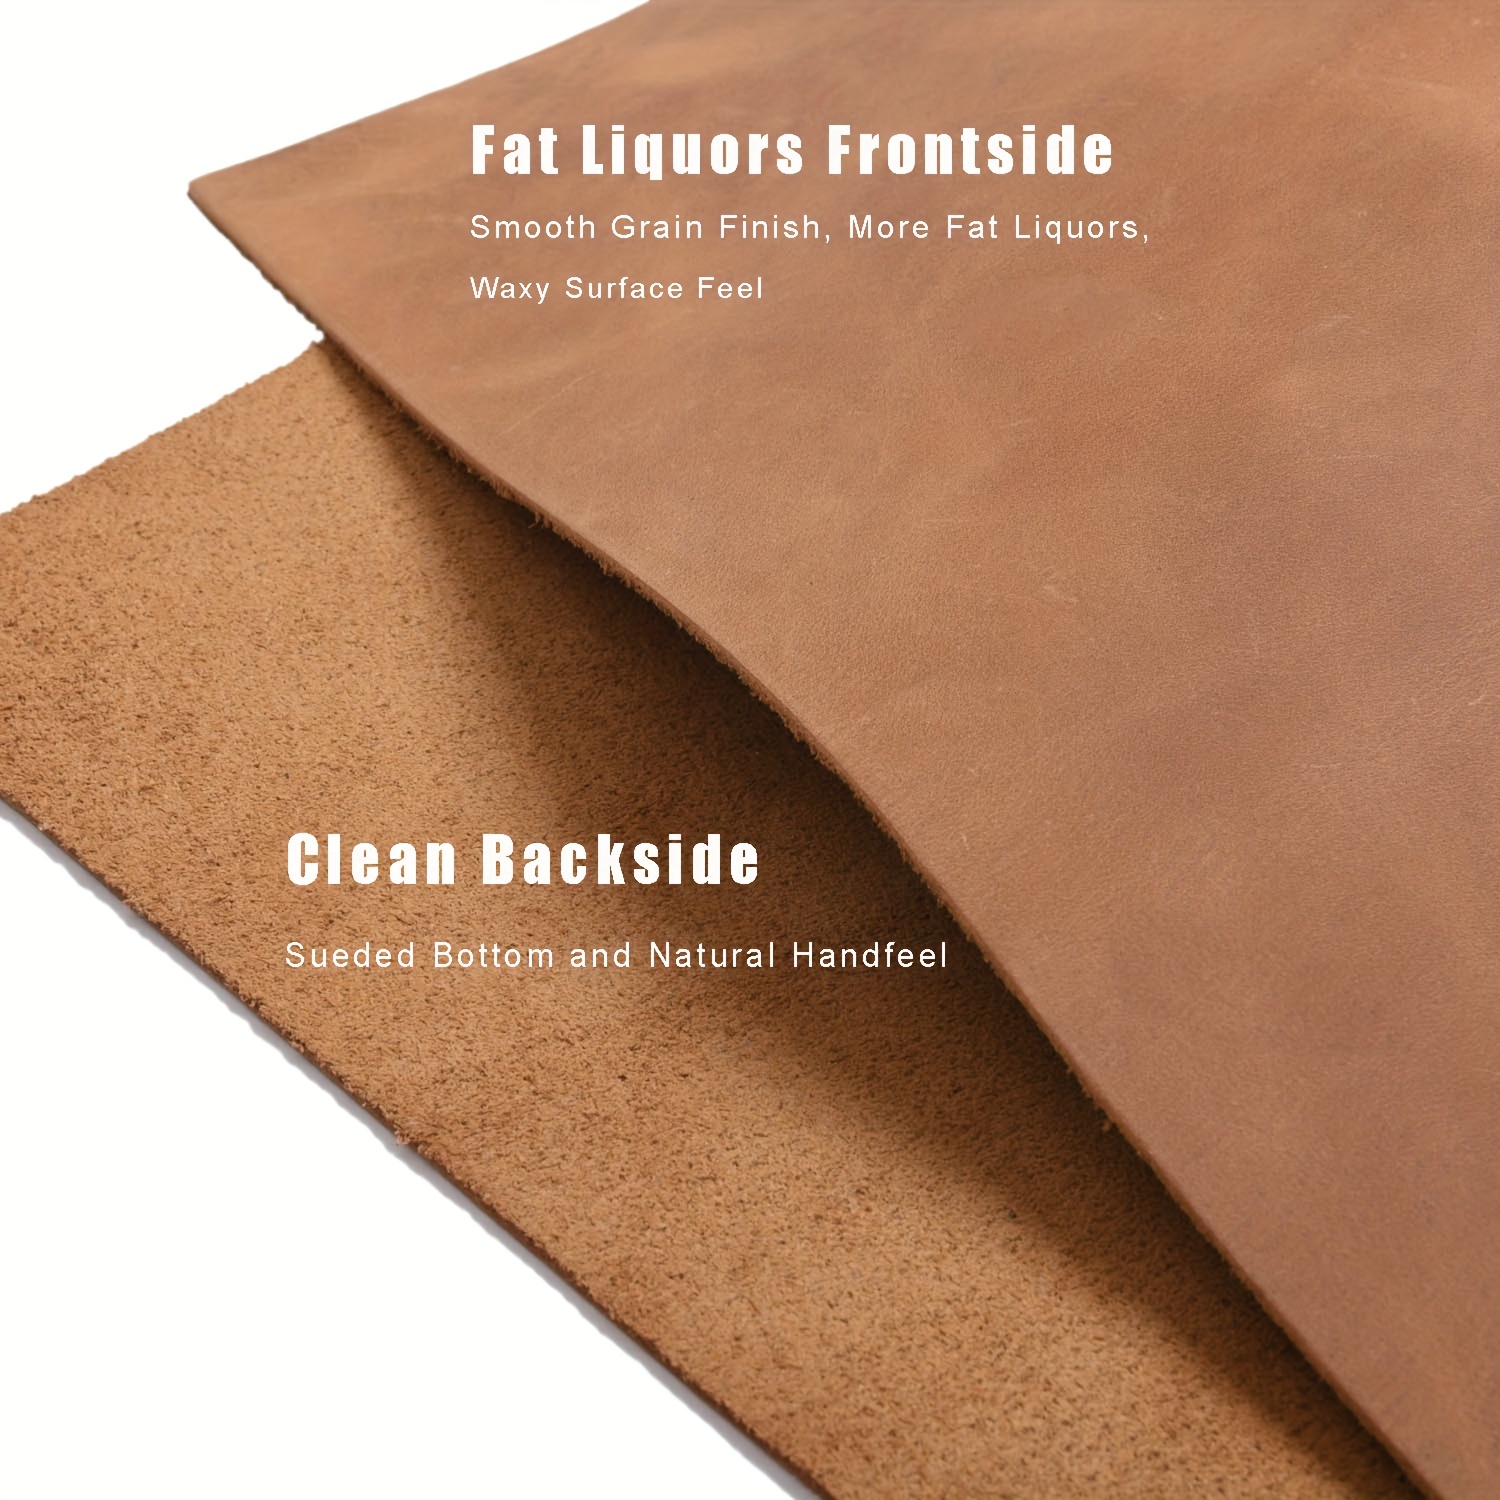 Genuine Leather Sheets For Crafts Arts Full Grain Leather - Temu